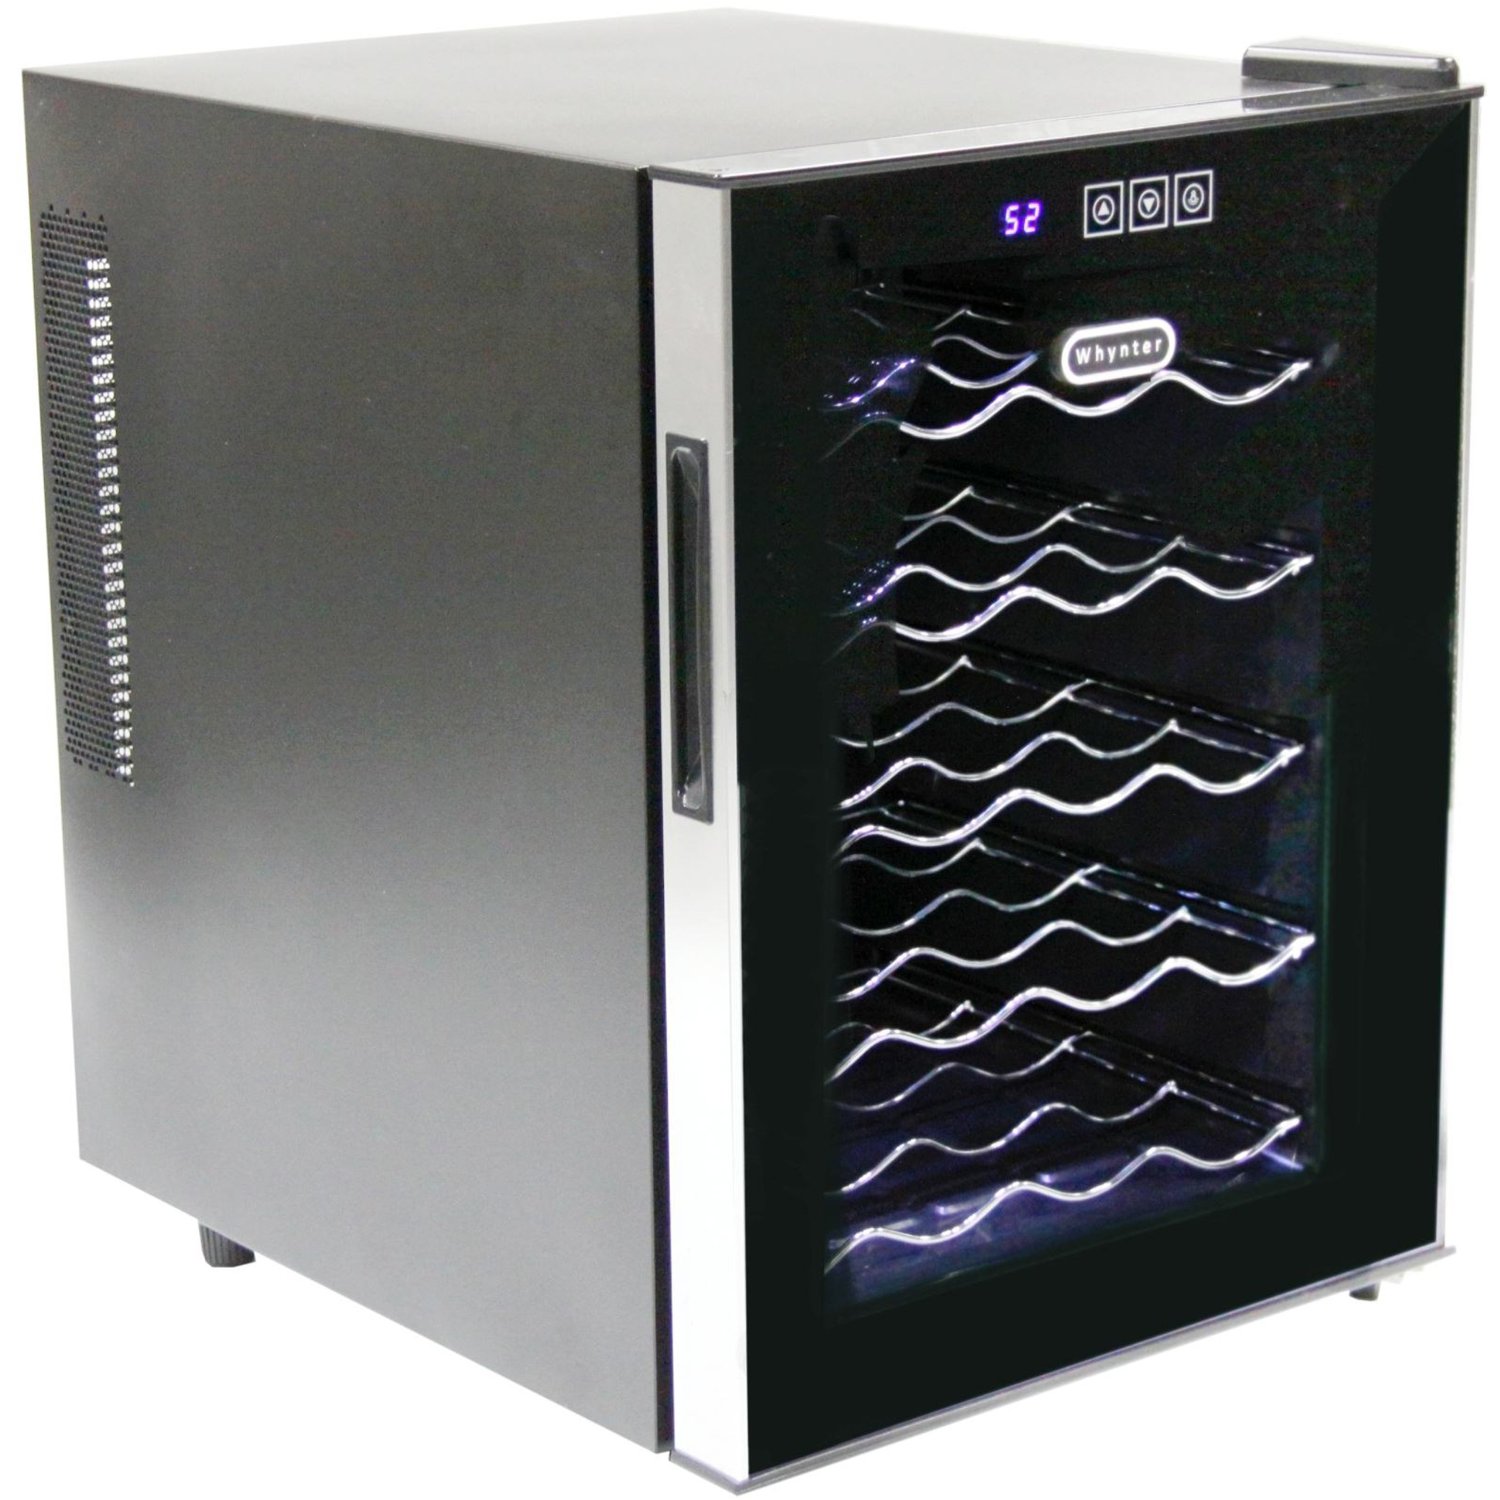 Whynter 20 Bottle Thermoelectric Wine Cooler-WC-201TD